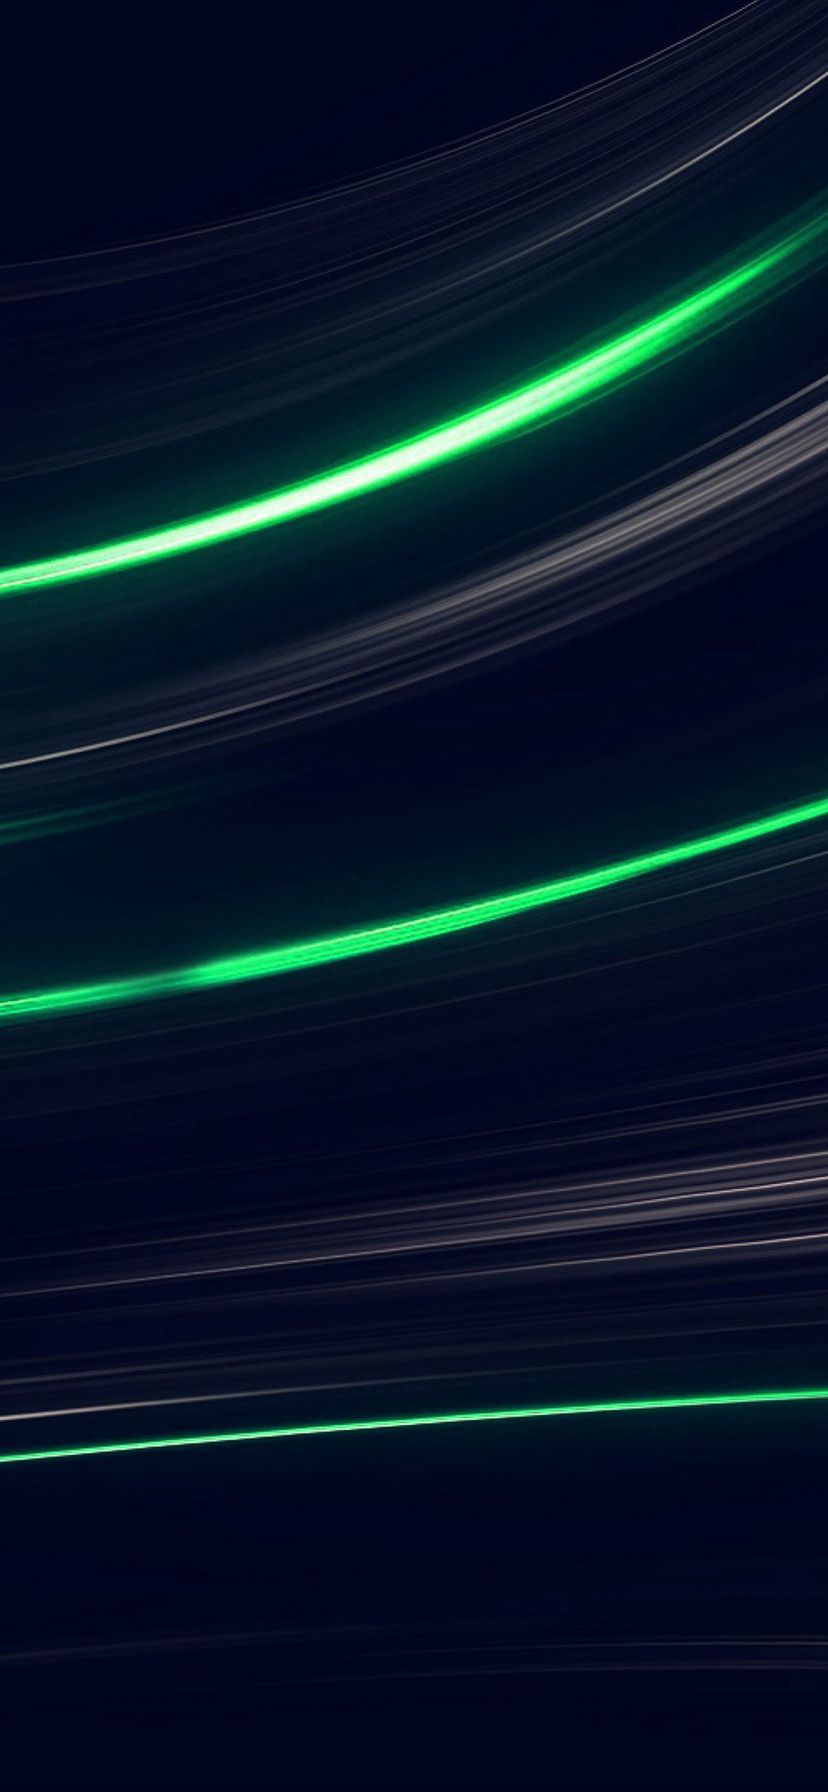 Green iPhone XR Wallpaper Free Green iPhone XR Background